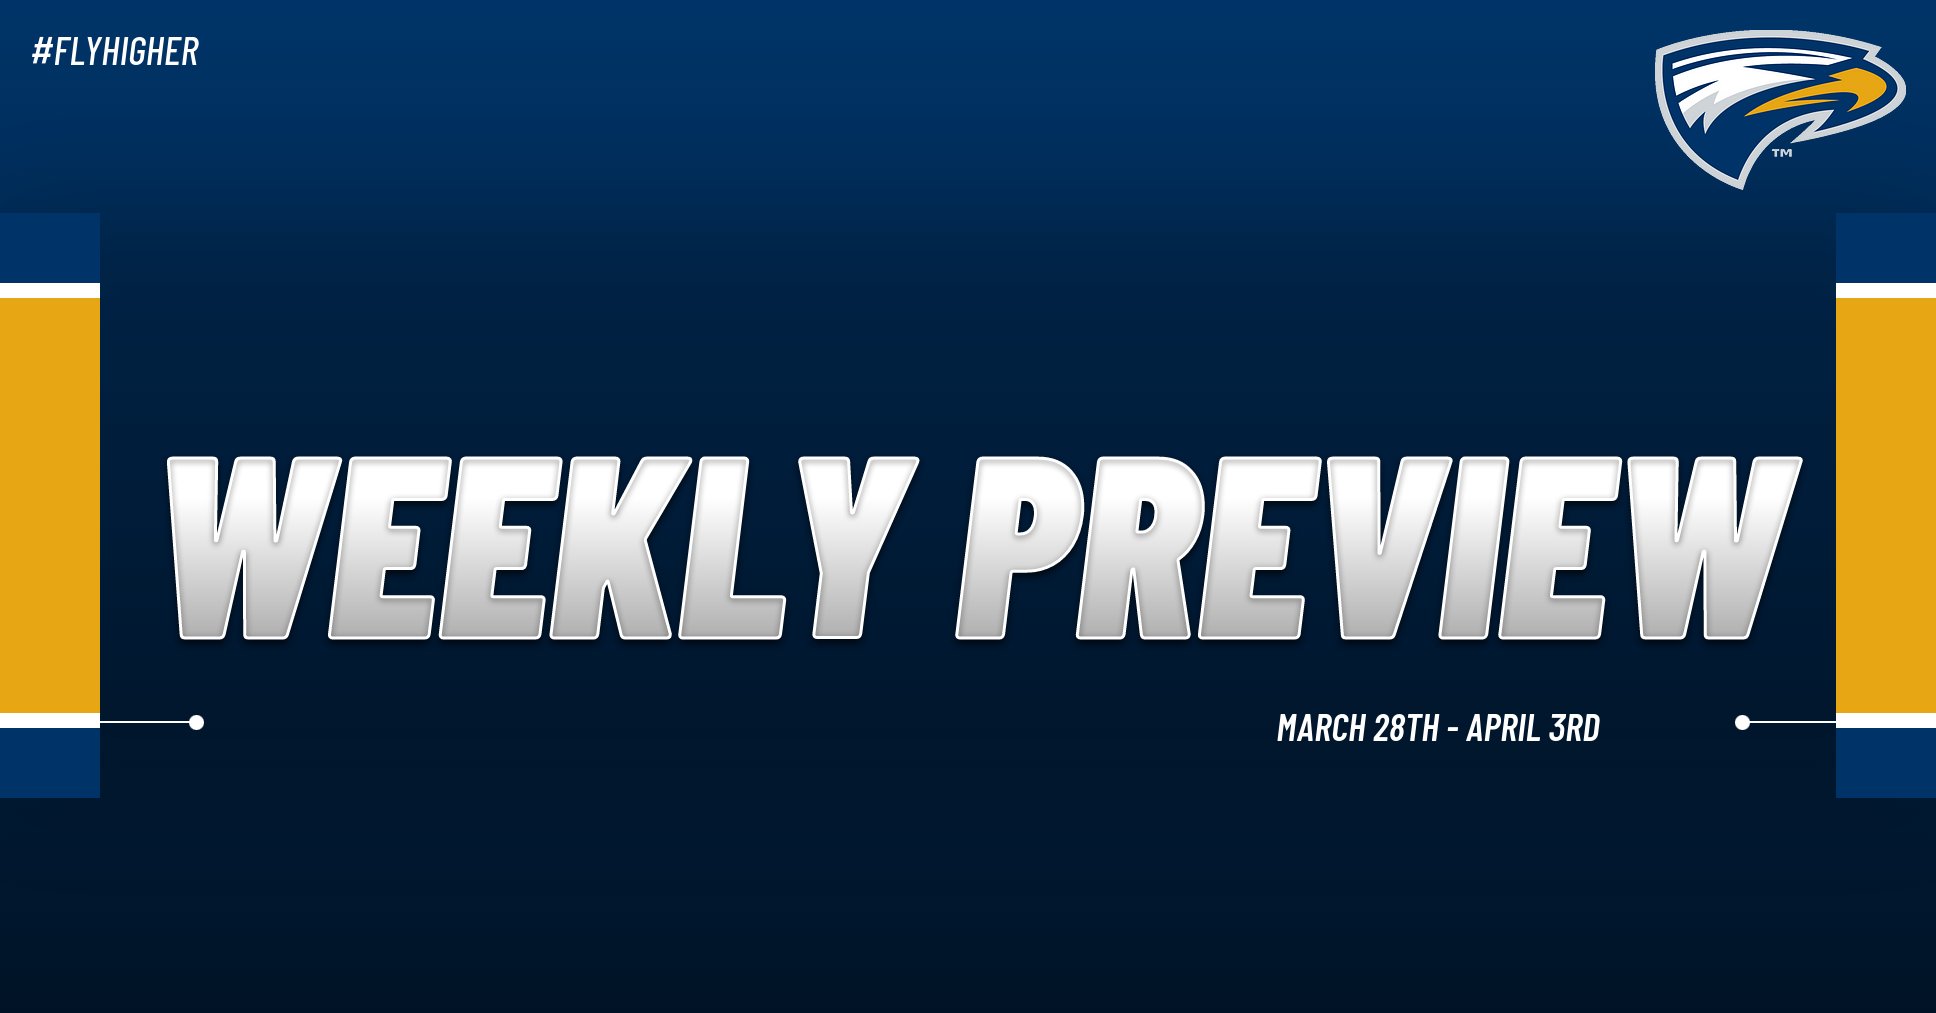 Emory Athletics Weekly Preview - March 28th - April 3rd